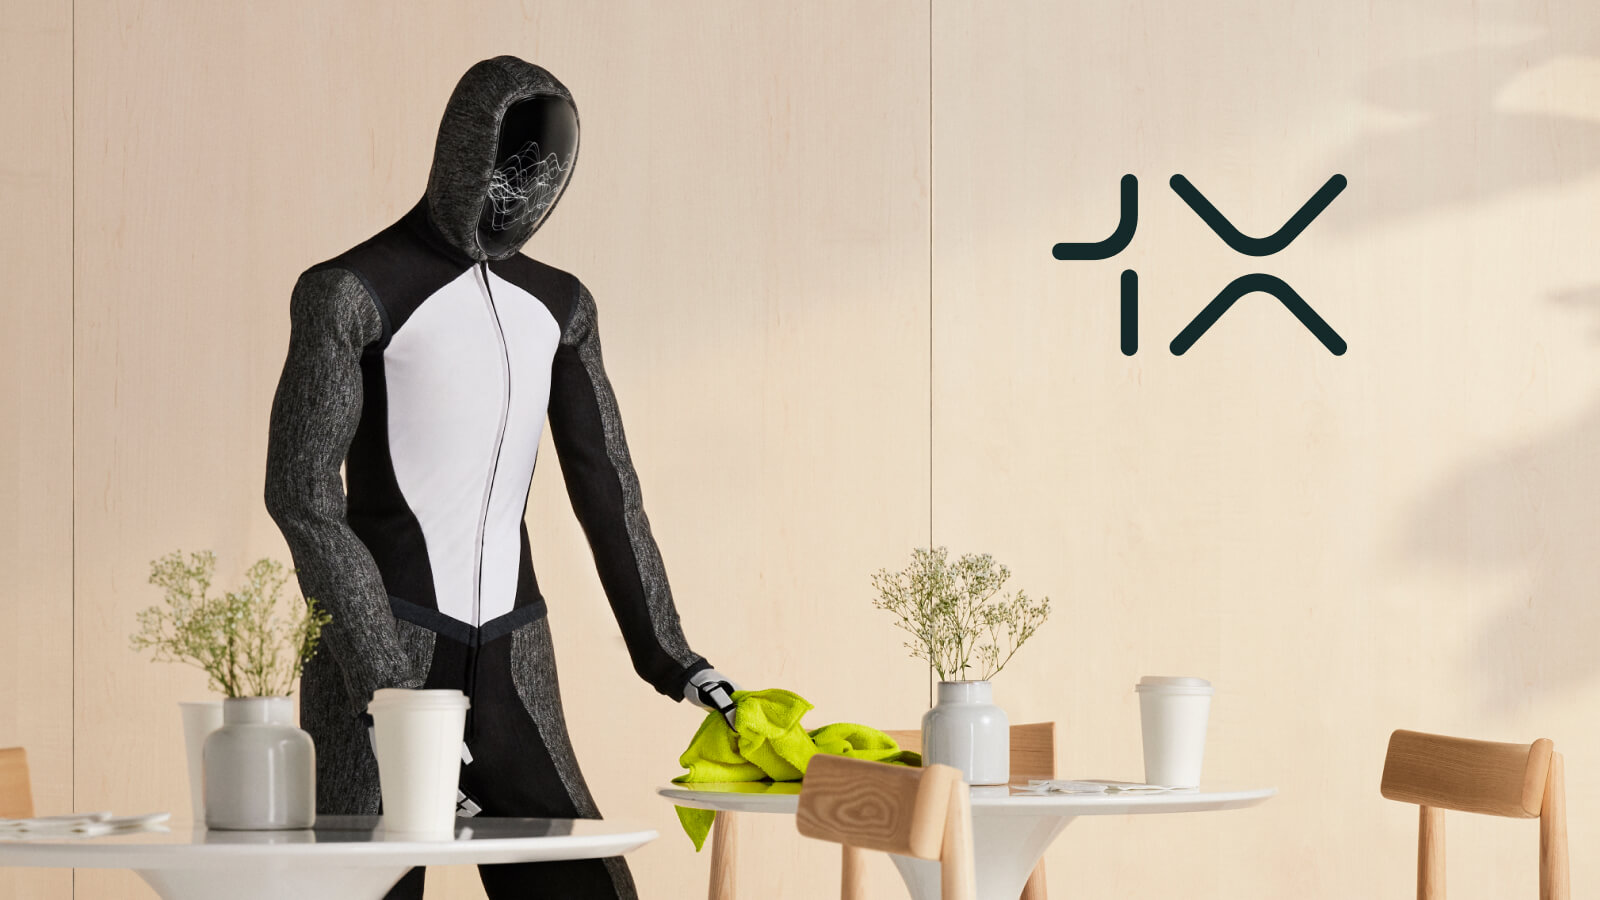 1x-secures-100m-funding-for-advancing-humanoid-robots